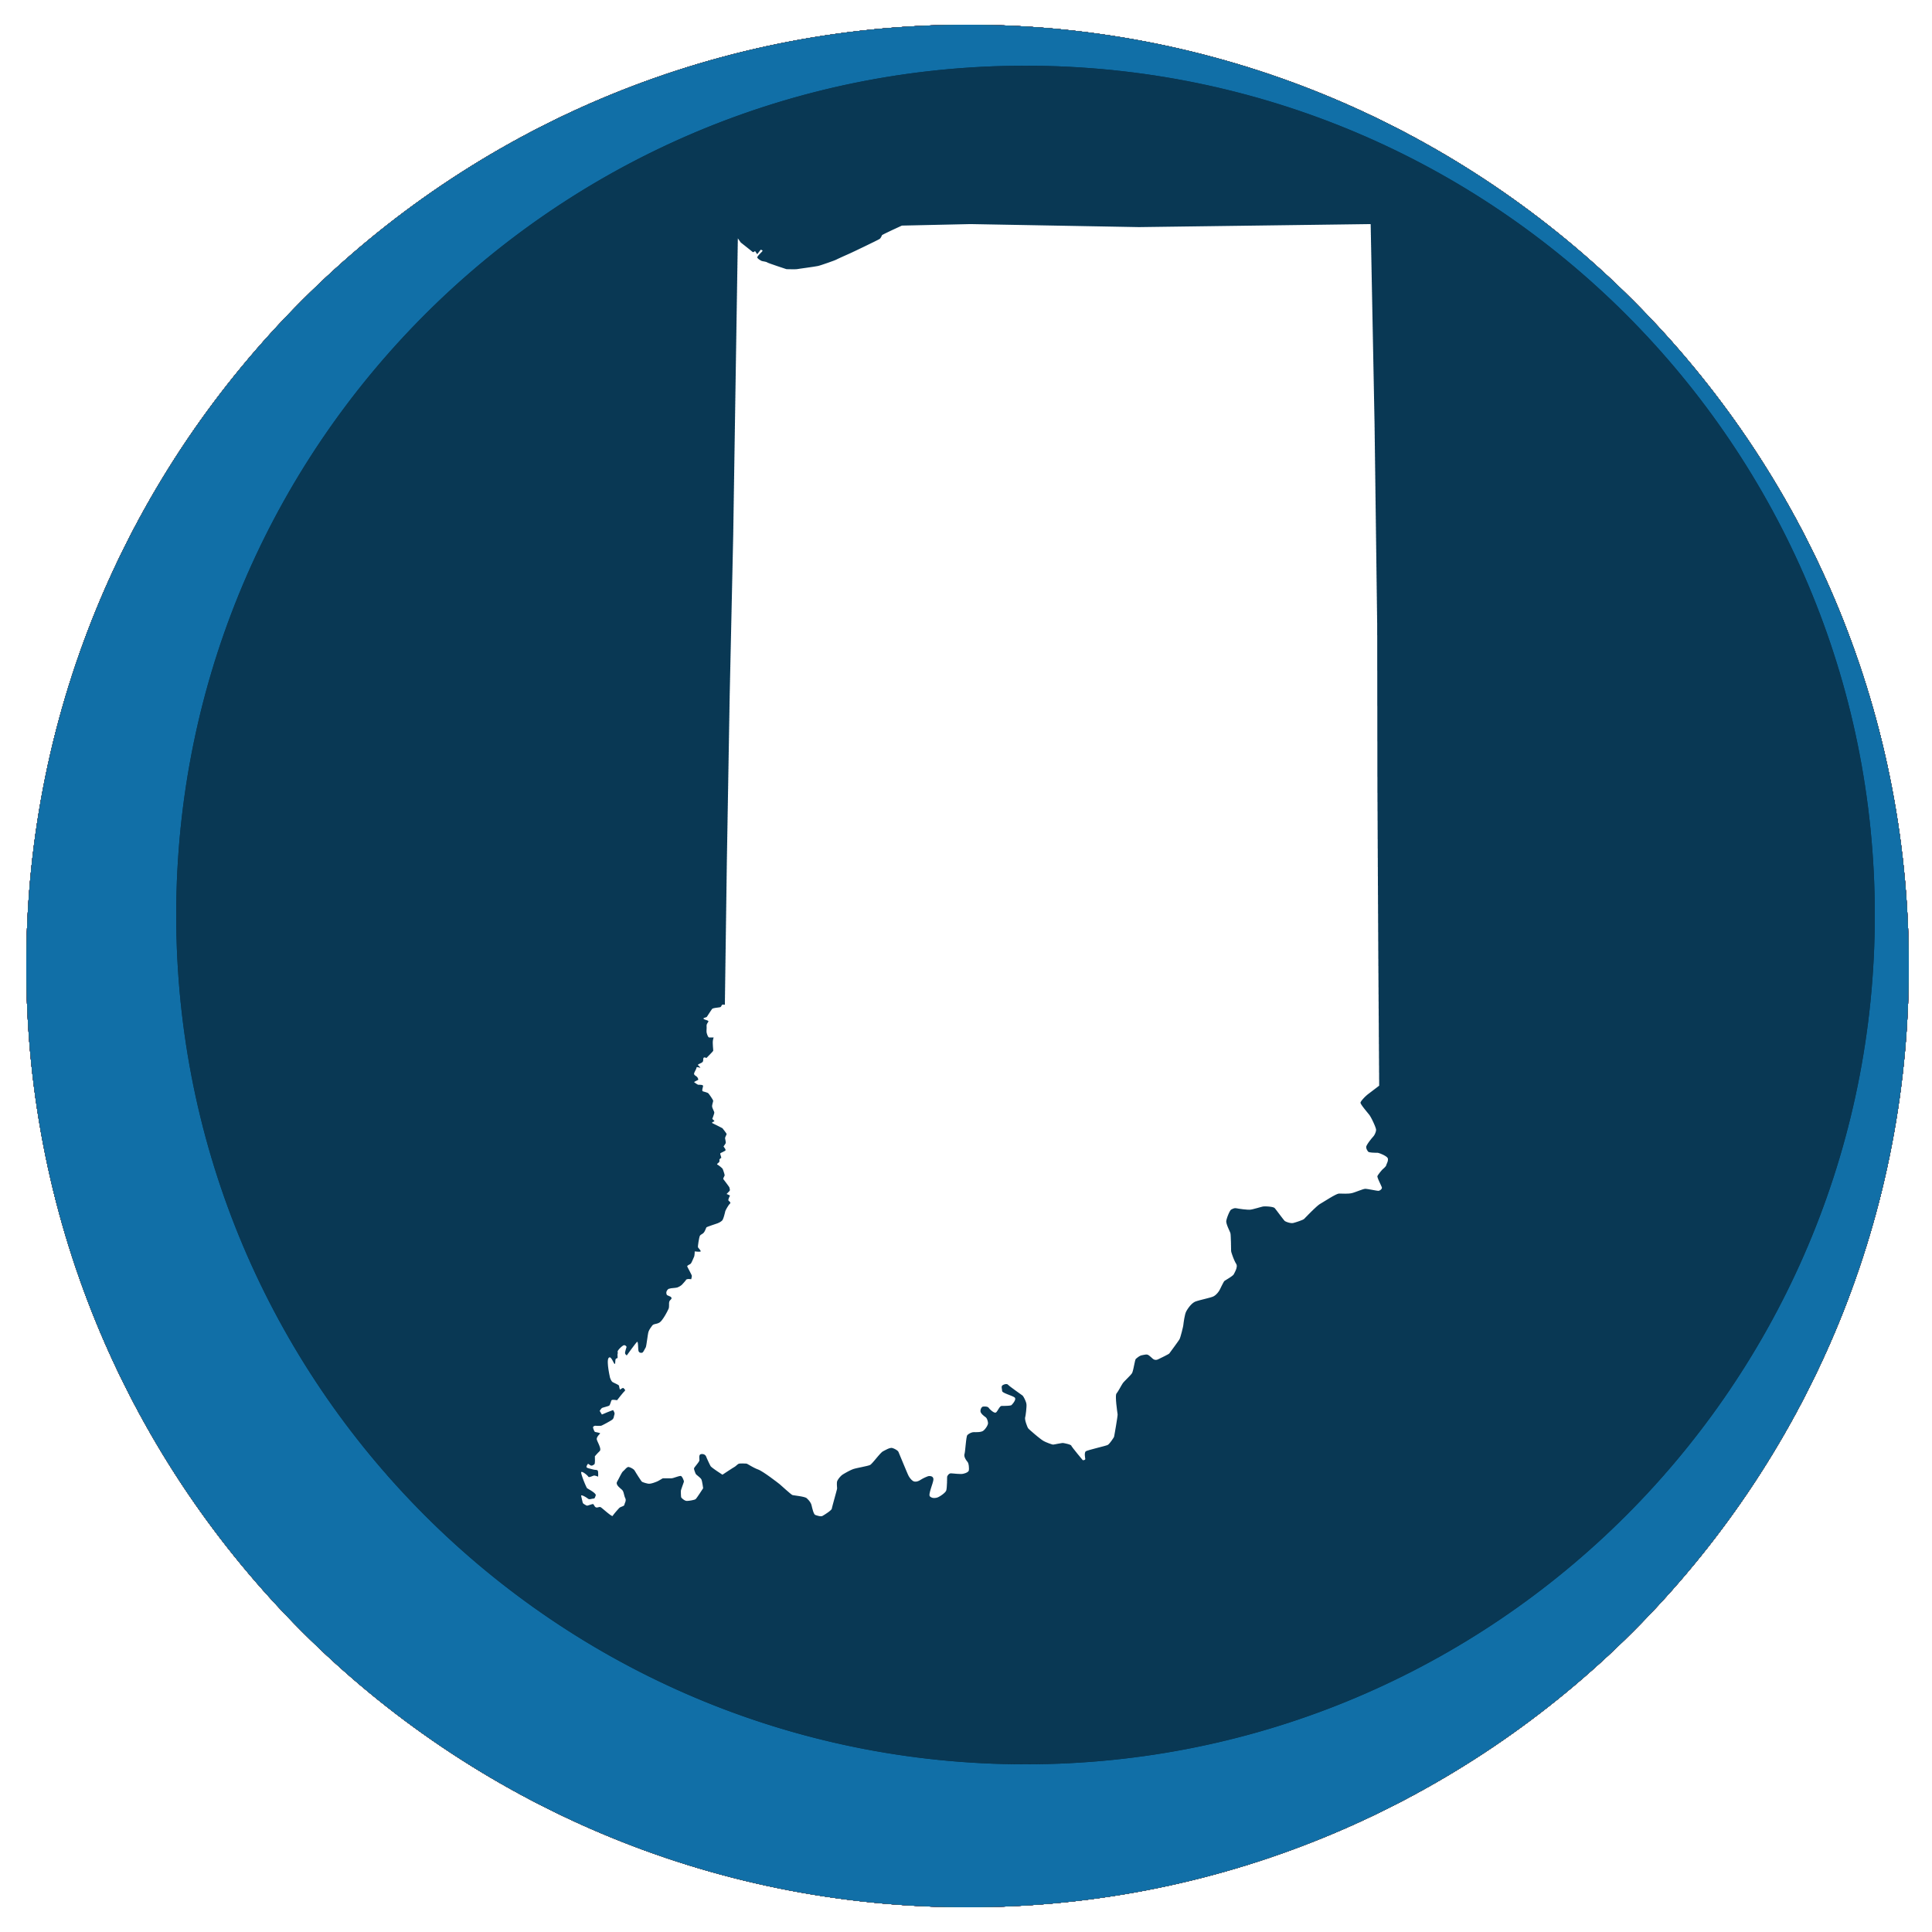 Indiana state shape in a circle